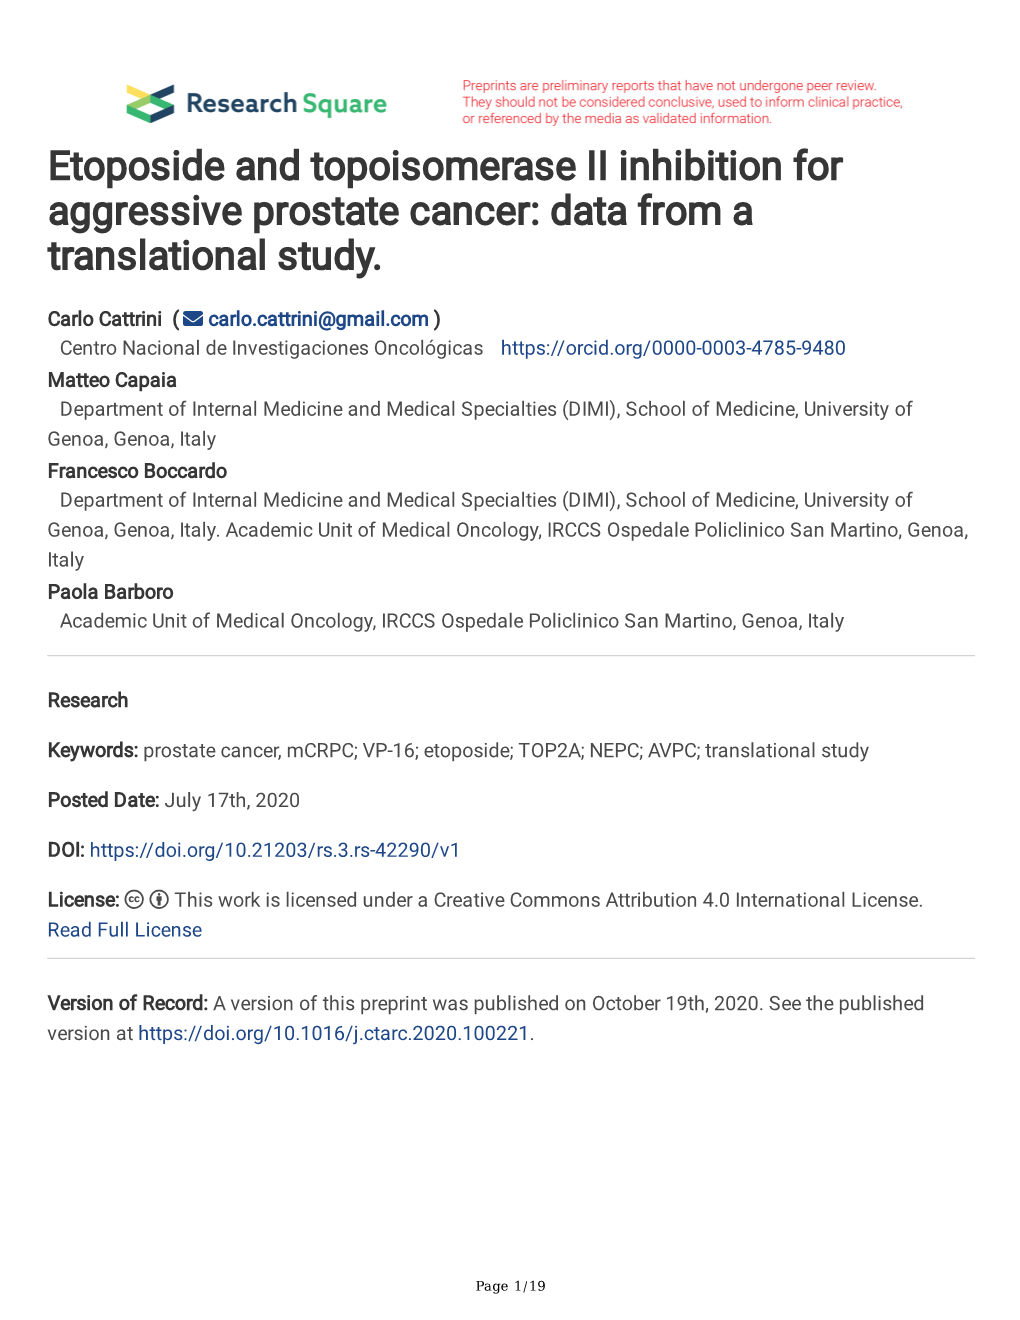 Etoposide and Topoisomerase II Inhibition for Aggressive Prostate Cancer: Data from a Translational Study